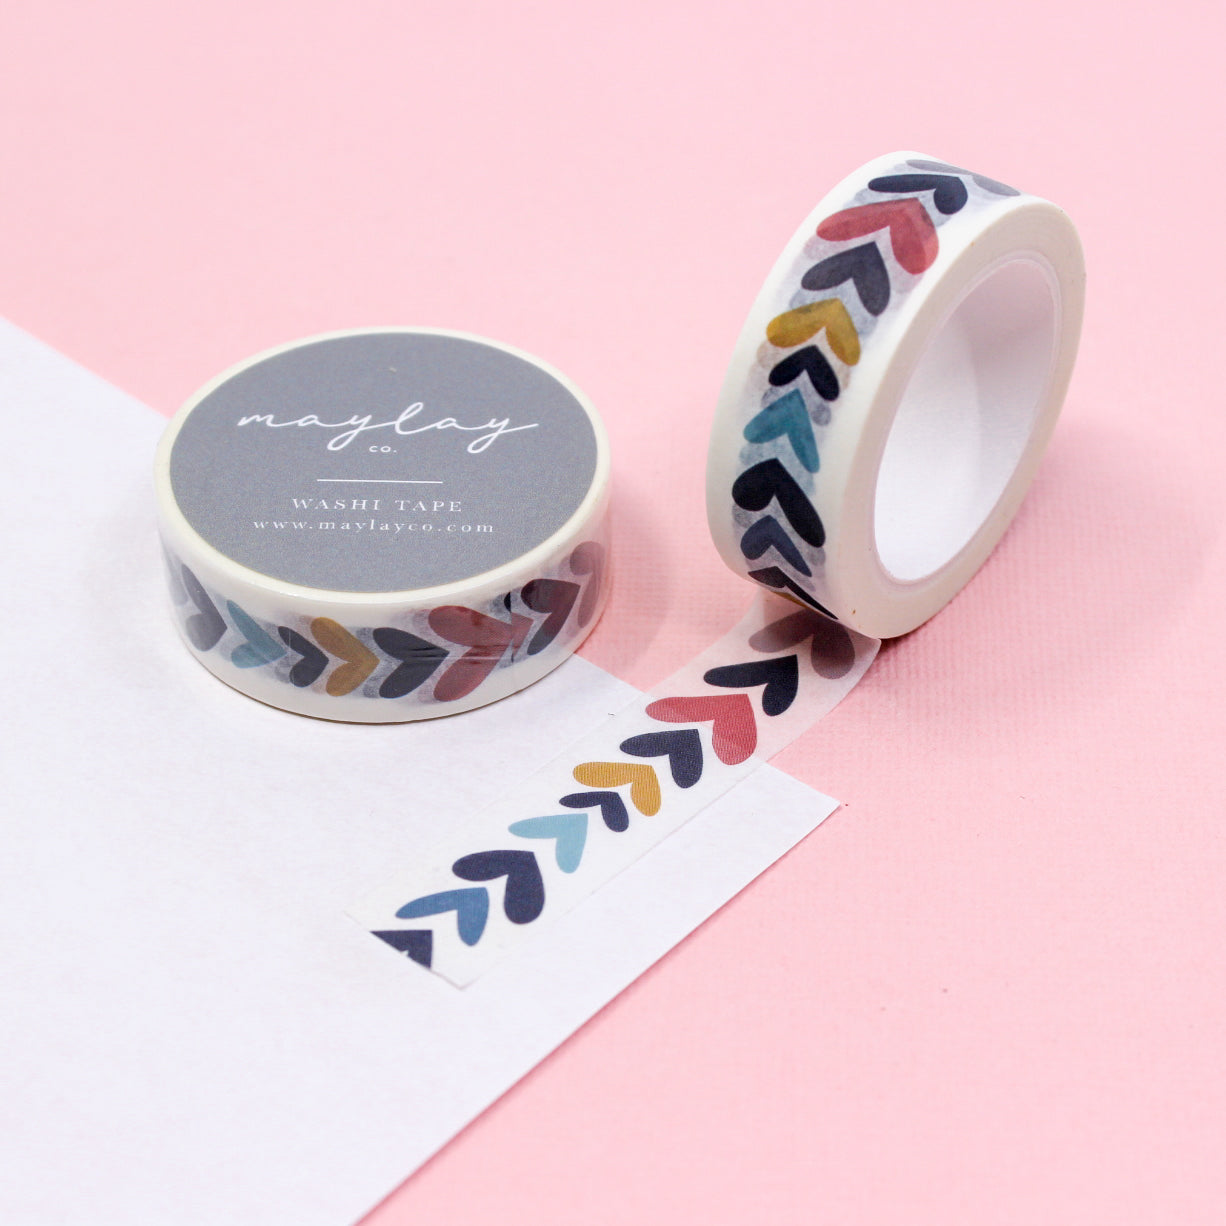 Celebrate love and unity with our Colorful Rainbow Connected Hearts Heartwood Washi Tape, featuring a vibrant and heartwarming design. Ideal for adding a touch of love and togetherness to your projects. This tape is from Maylay Co. and sold at BBB Supplies Craft Shop.